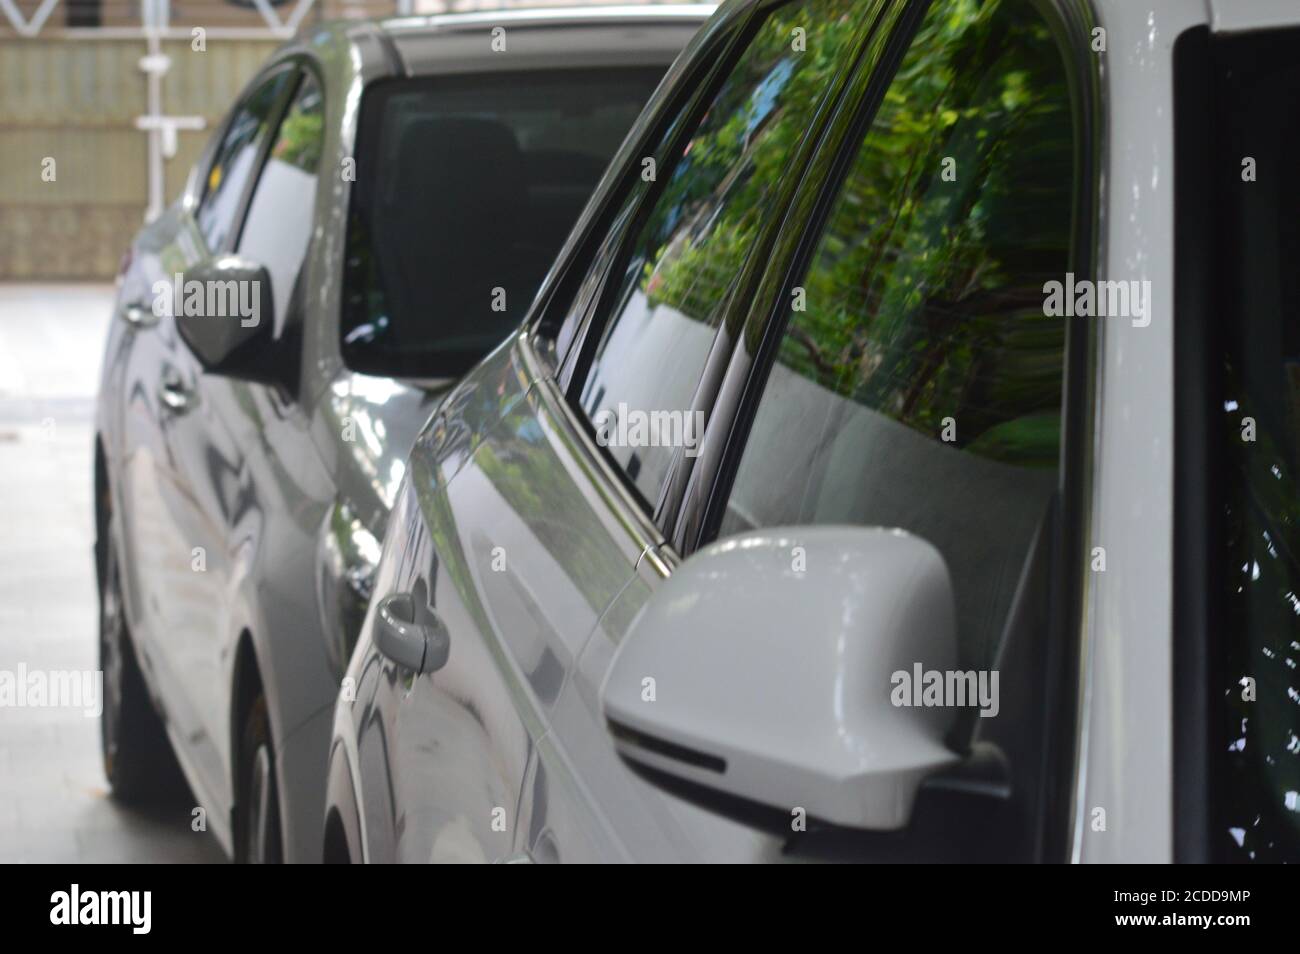 Luxury cars parked in a modern house in India Stock Photo